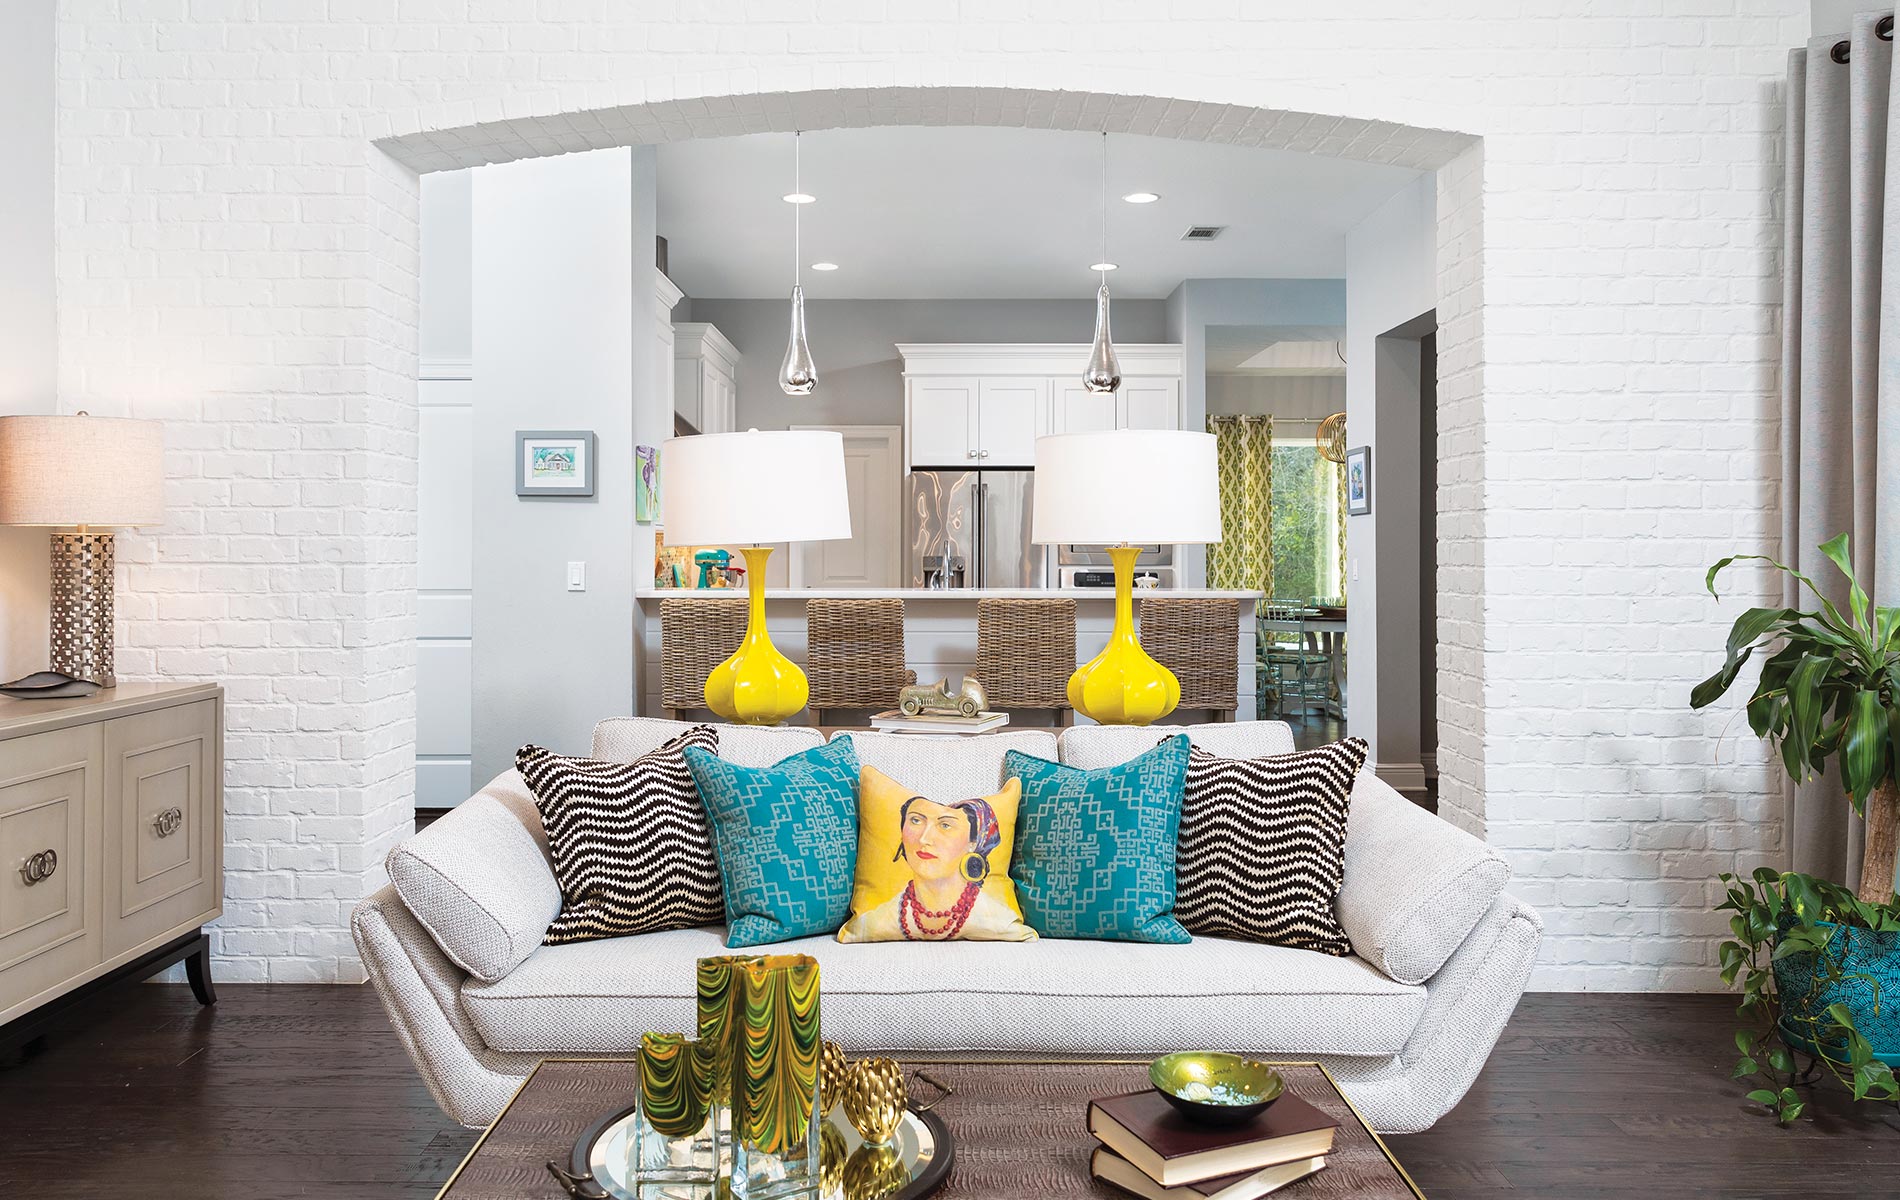 White painted brick is the perfect complement to colorful accents in this new construction home. Gorgeous lighting and proper placement of recessed can lights help create a bright and cheerful space with family in mind.